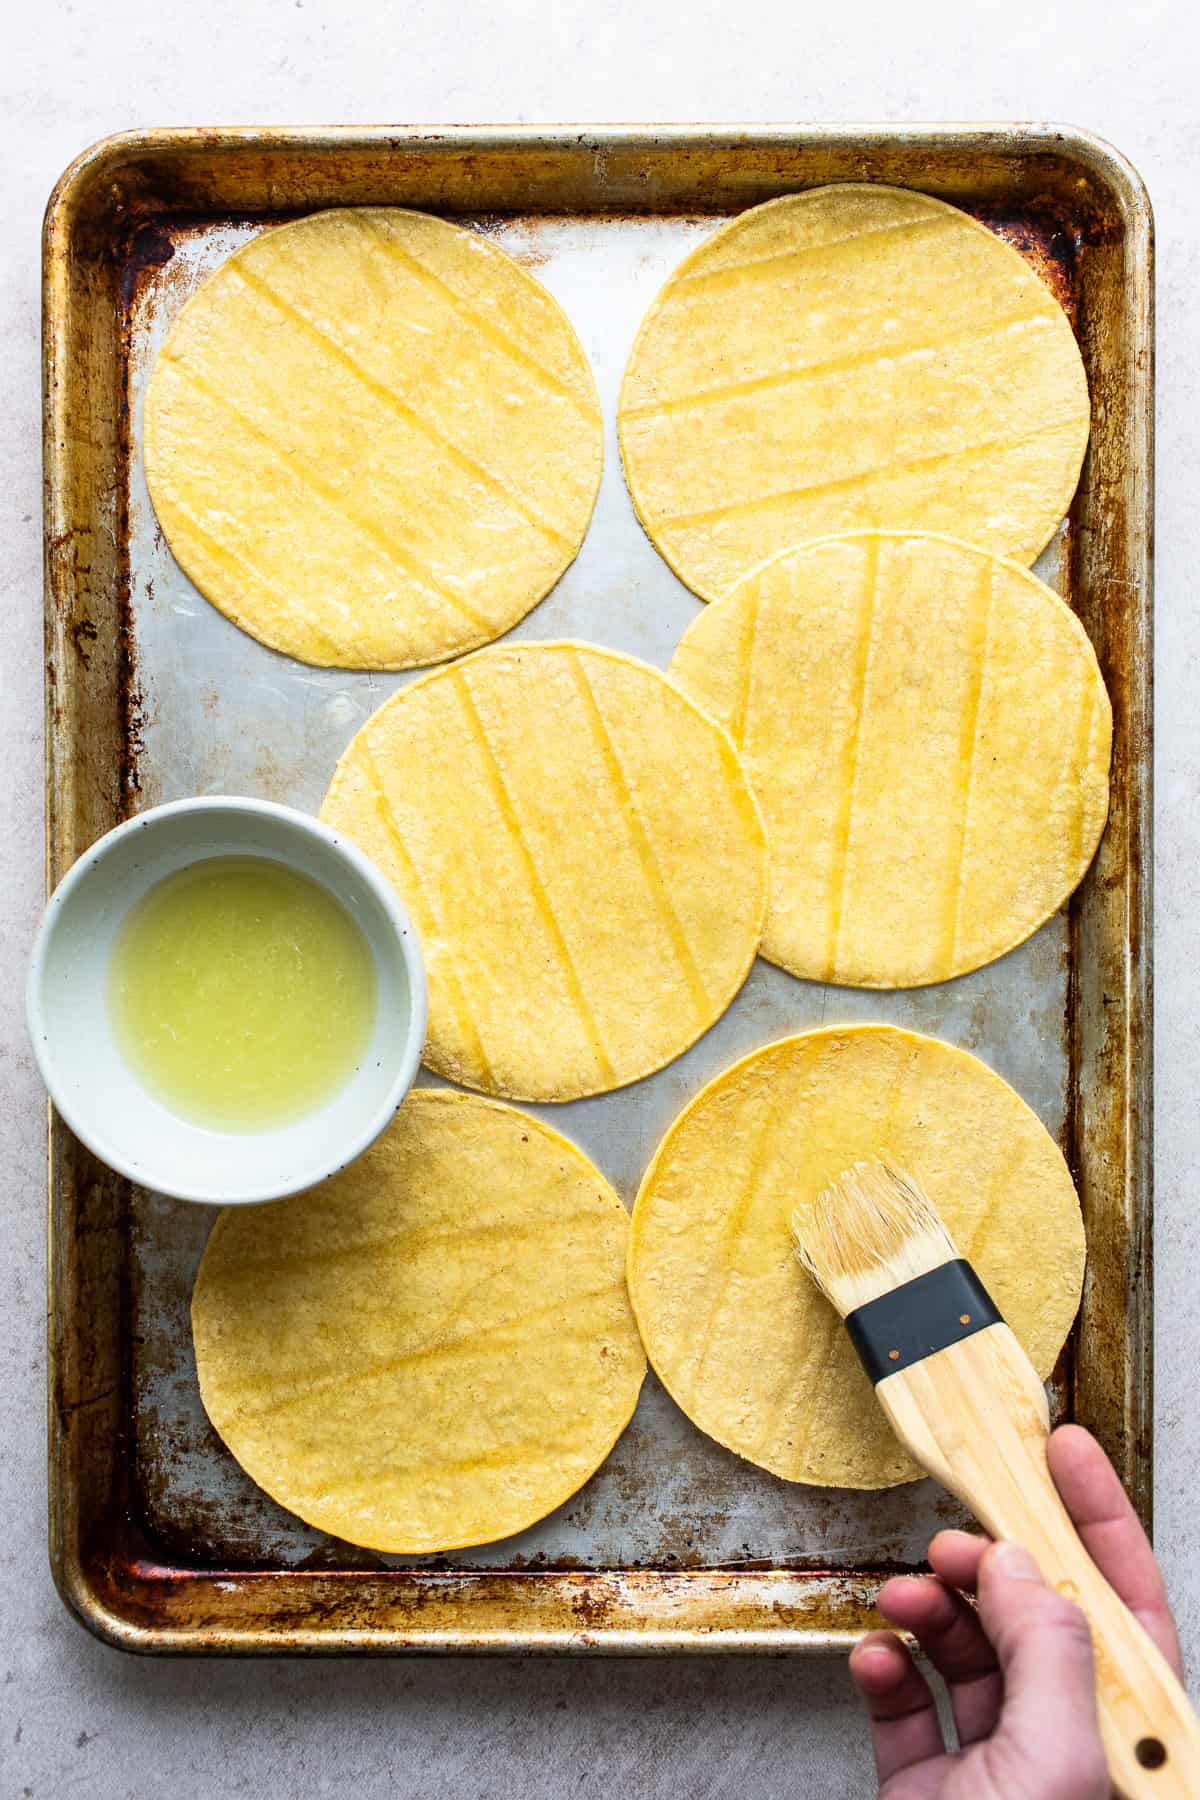 Oil being brushed onto corn tortillas.